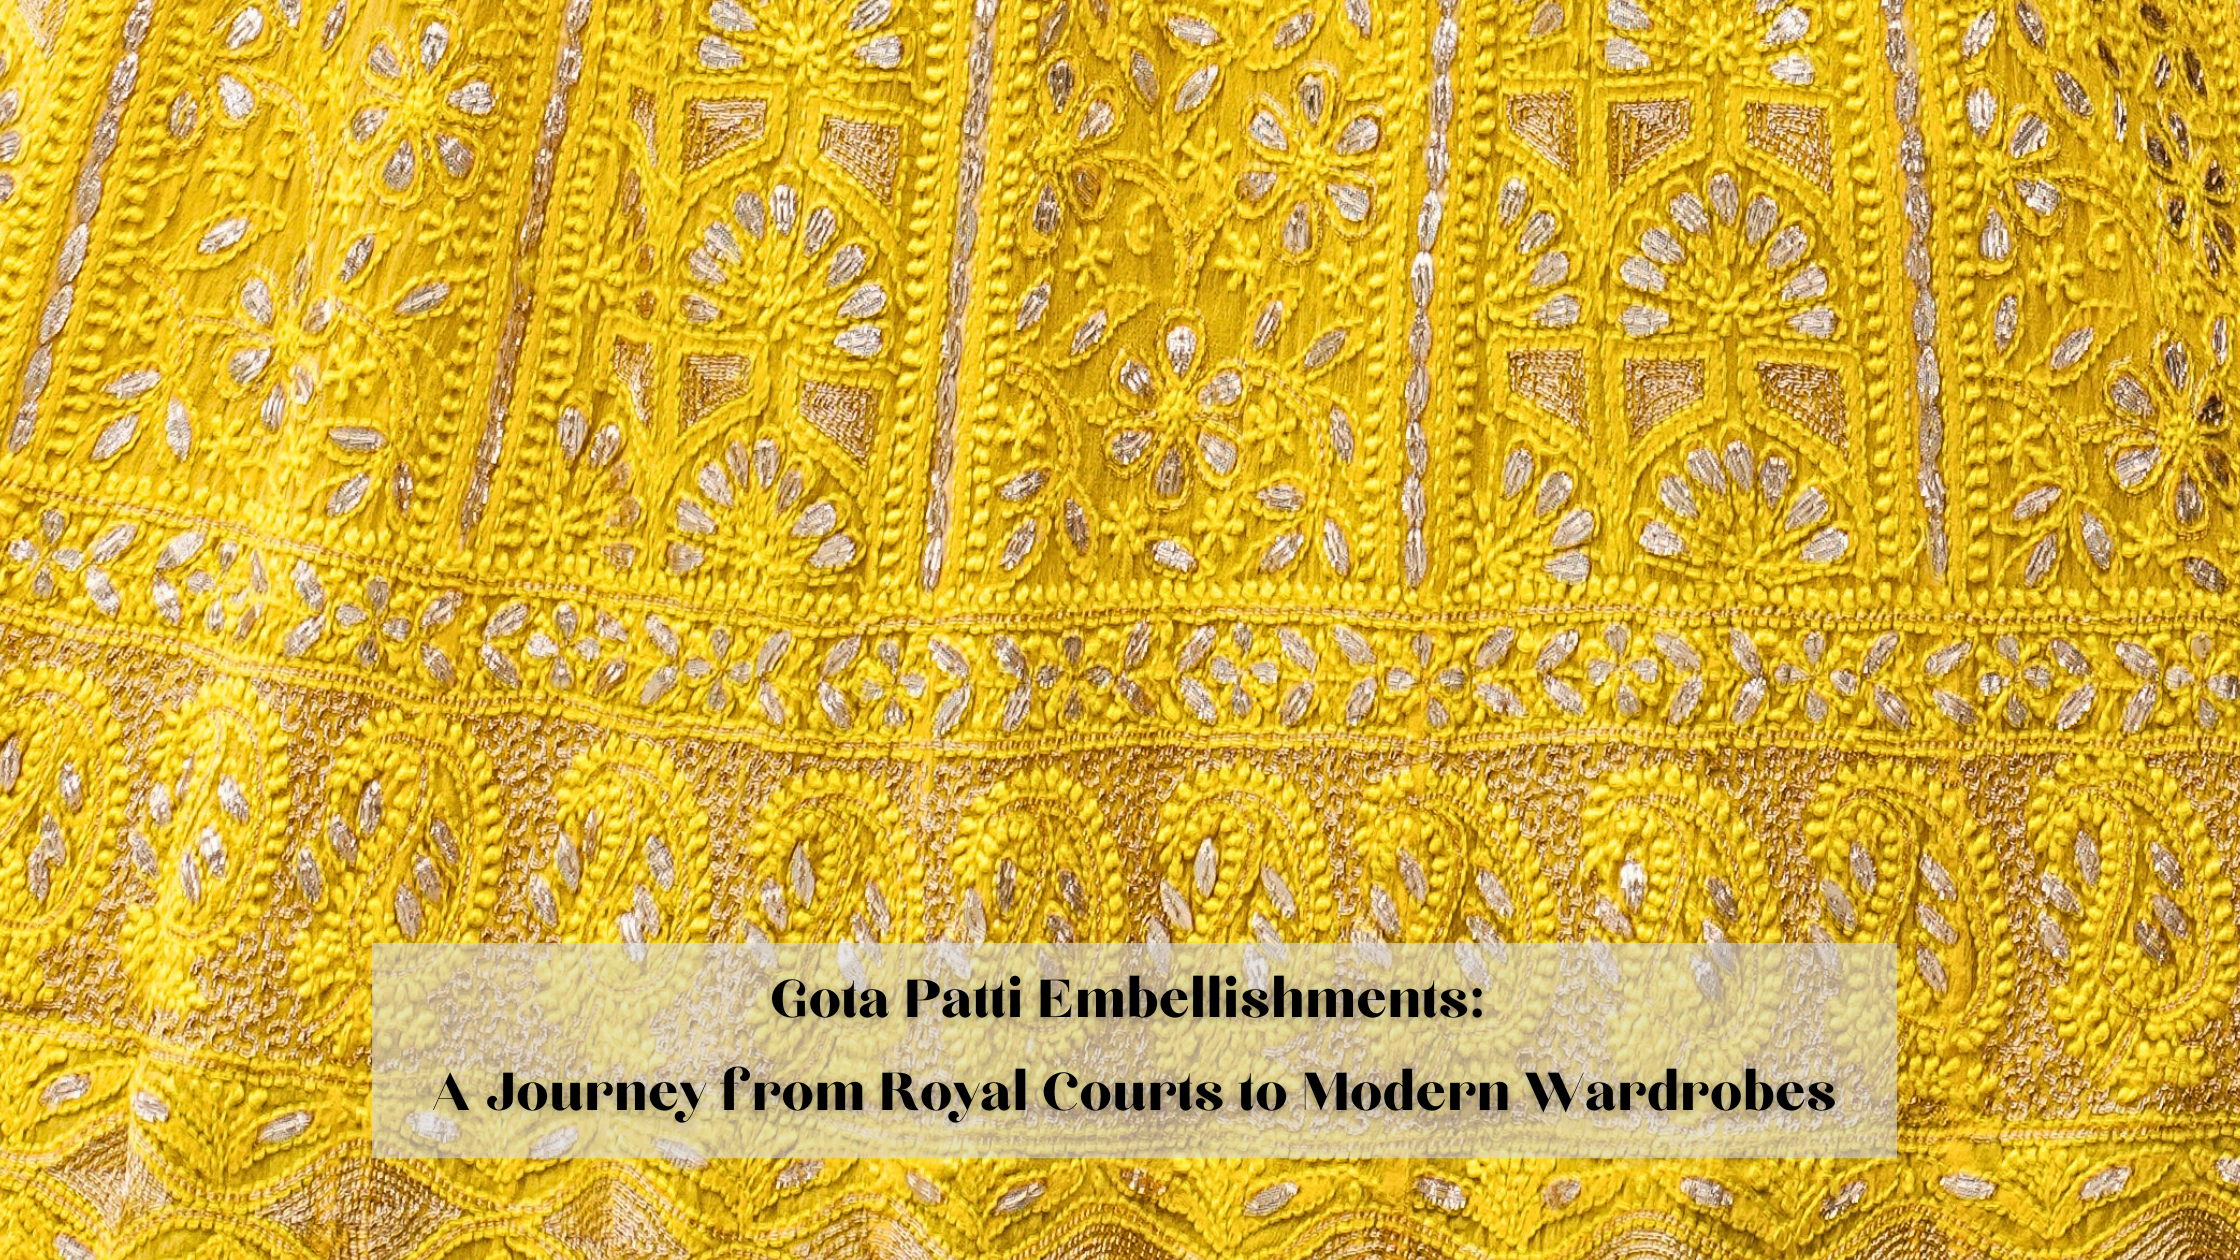 Gota Patti Embellishments: A Journey from Royal Courts to Modern Wardrobes